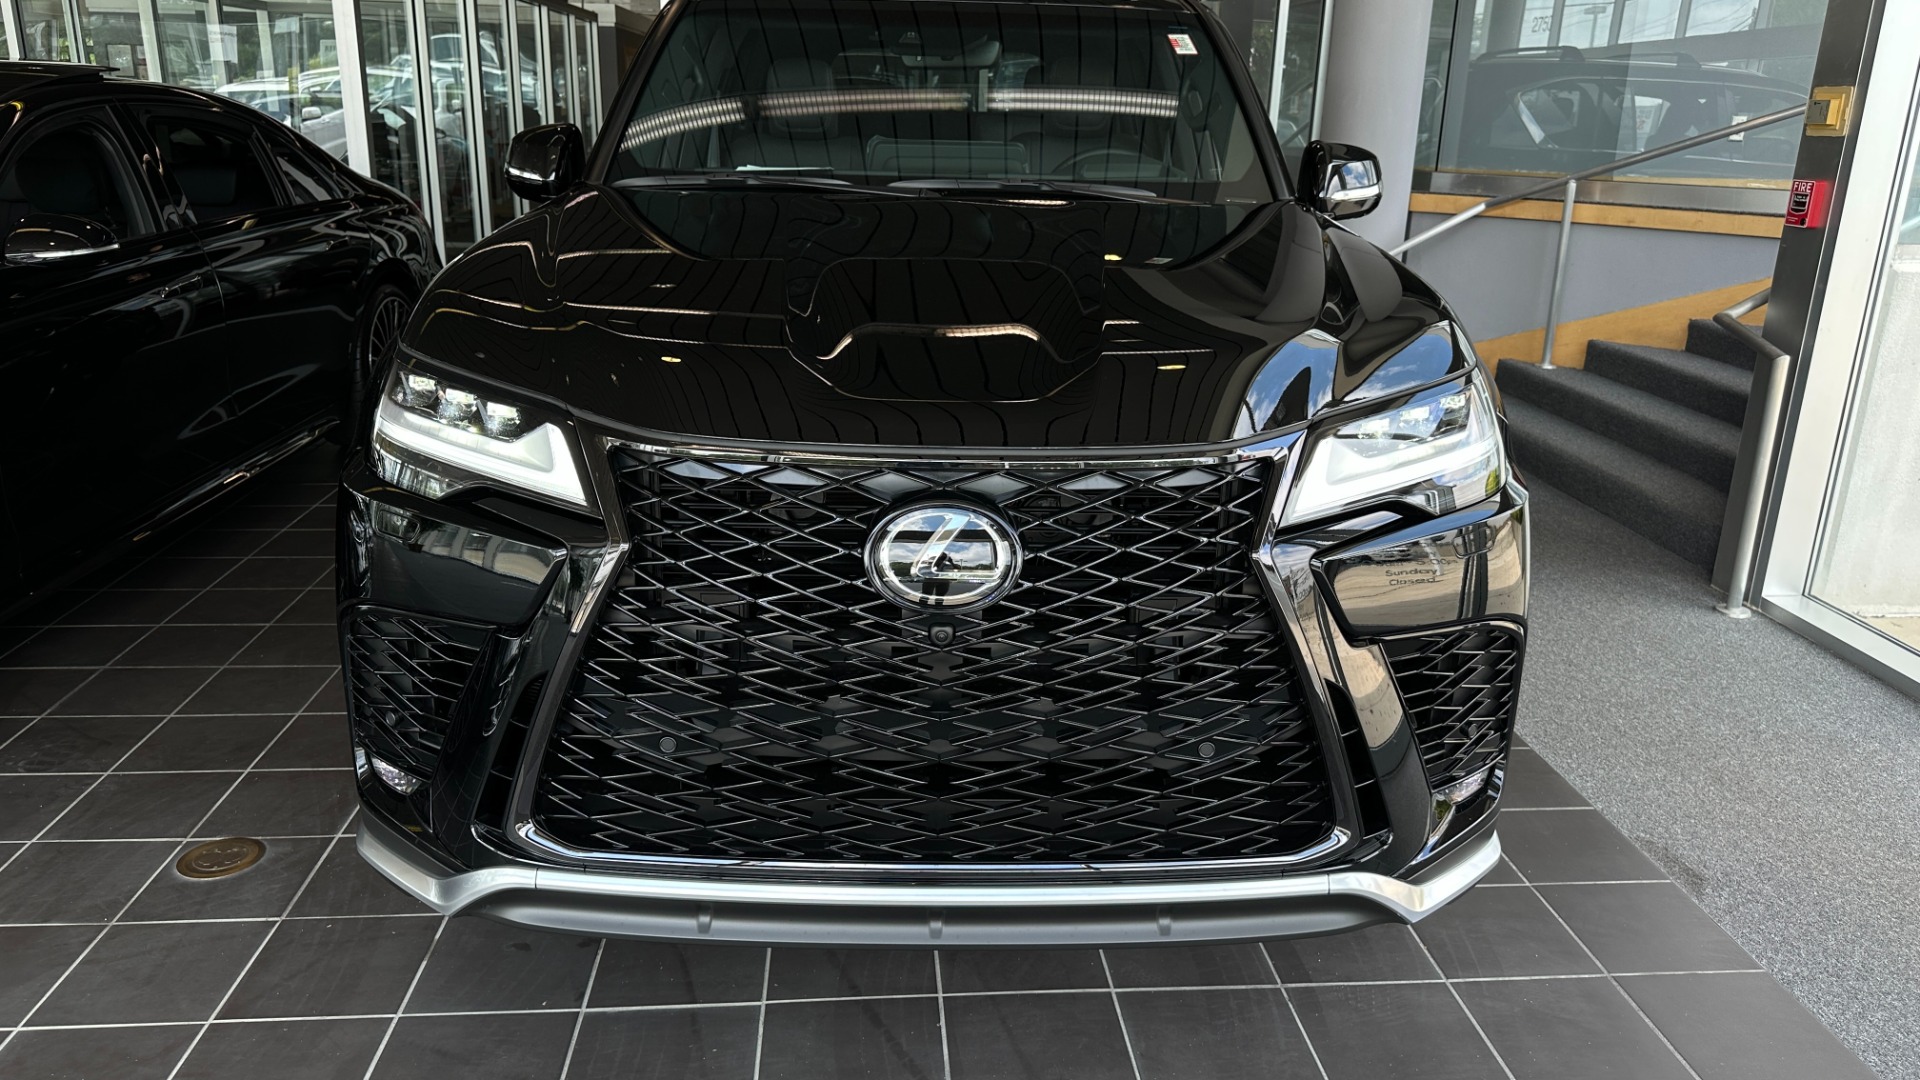 Used 2023 Lexus LX LX 600 F SPORT / MARK LEVINSON / HEIGHT CONTROL / CROSS BARS for sale $138,499 at Formula Imports in Charlotte NC 28227 3